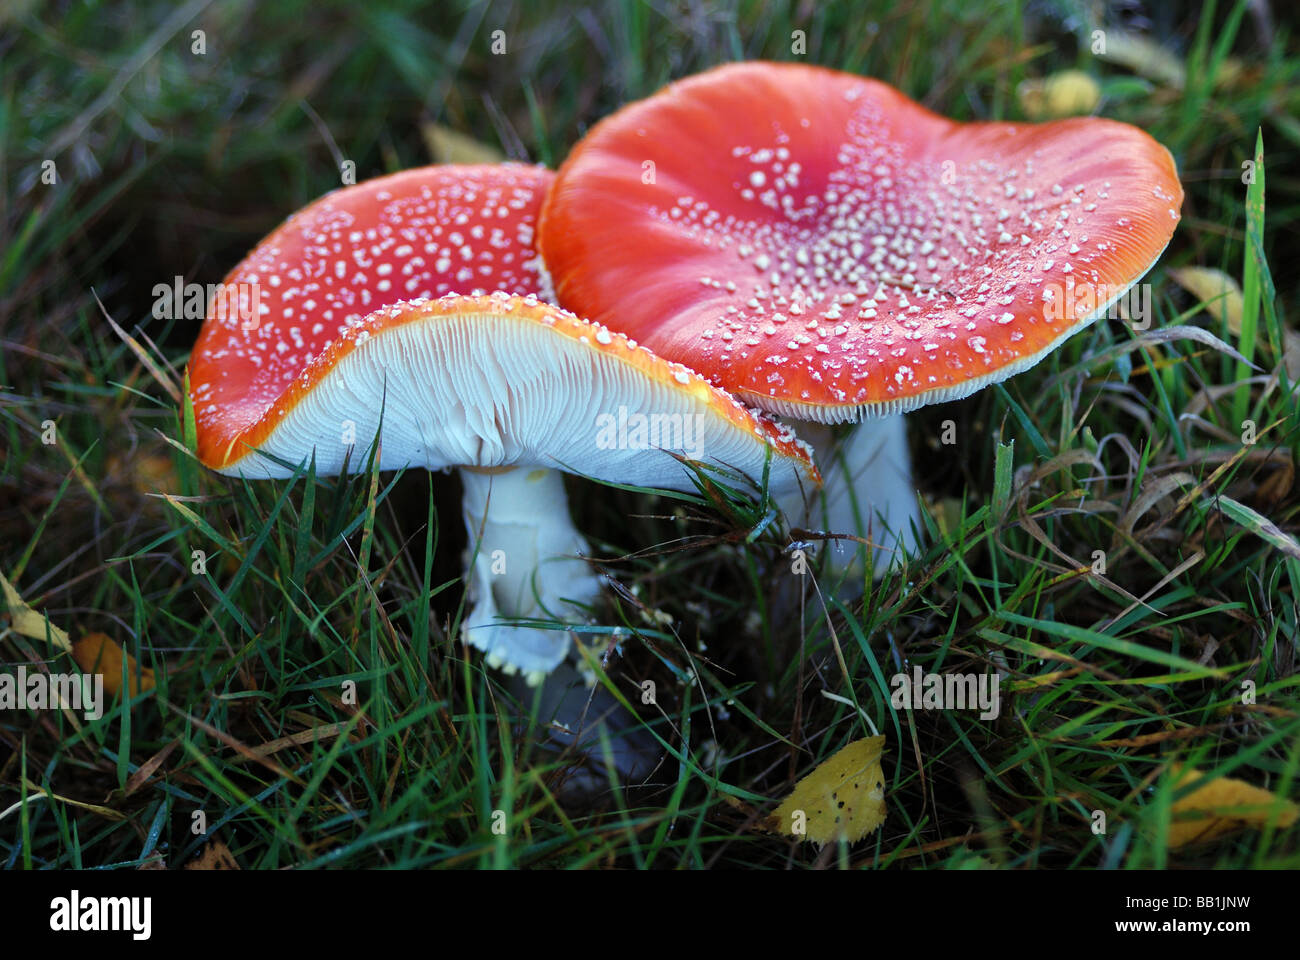 FLY AGARIC (AMANITA MUSCARIA) TOADSTOOLS GROWING IN COUNTRYSIDE Stock Photo